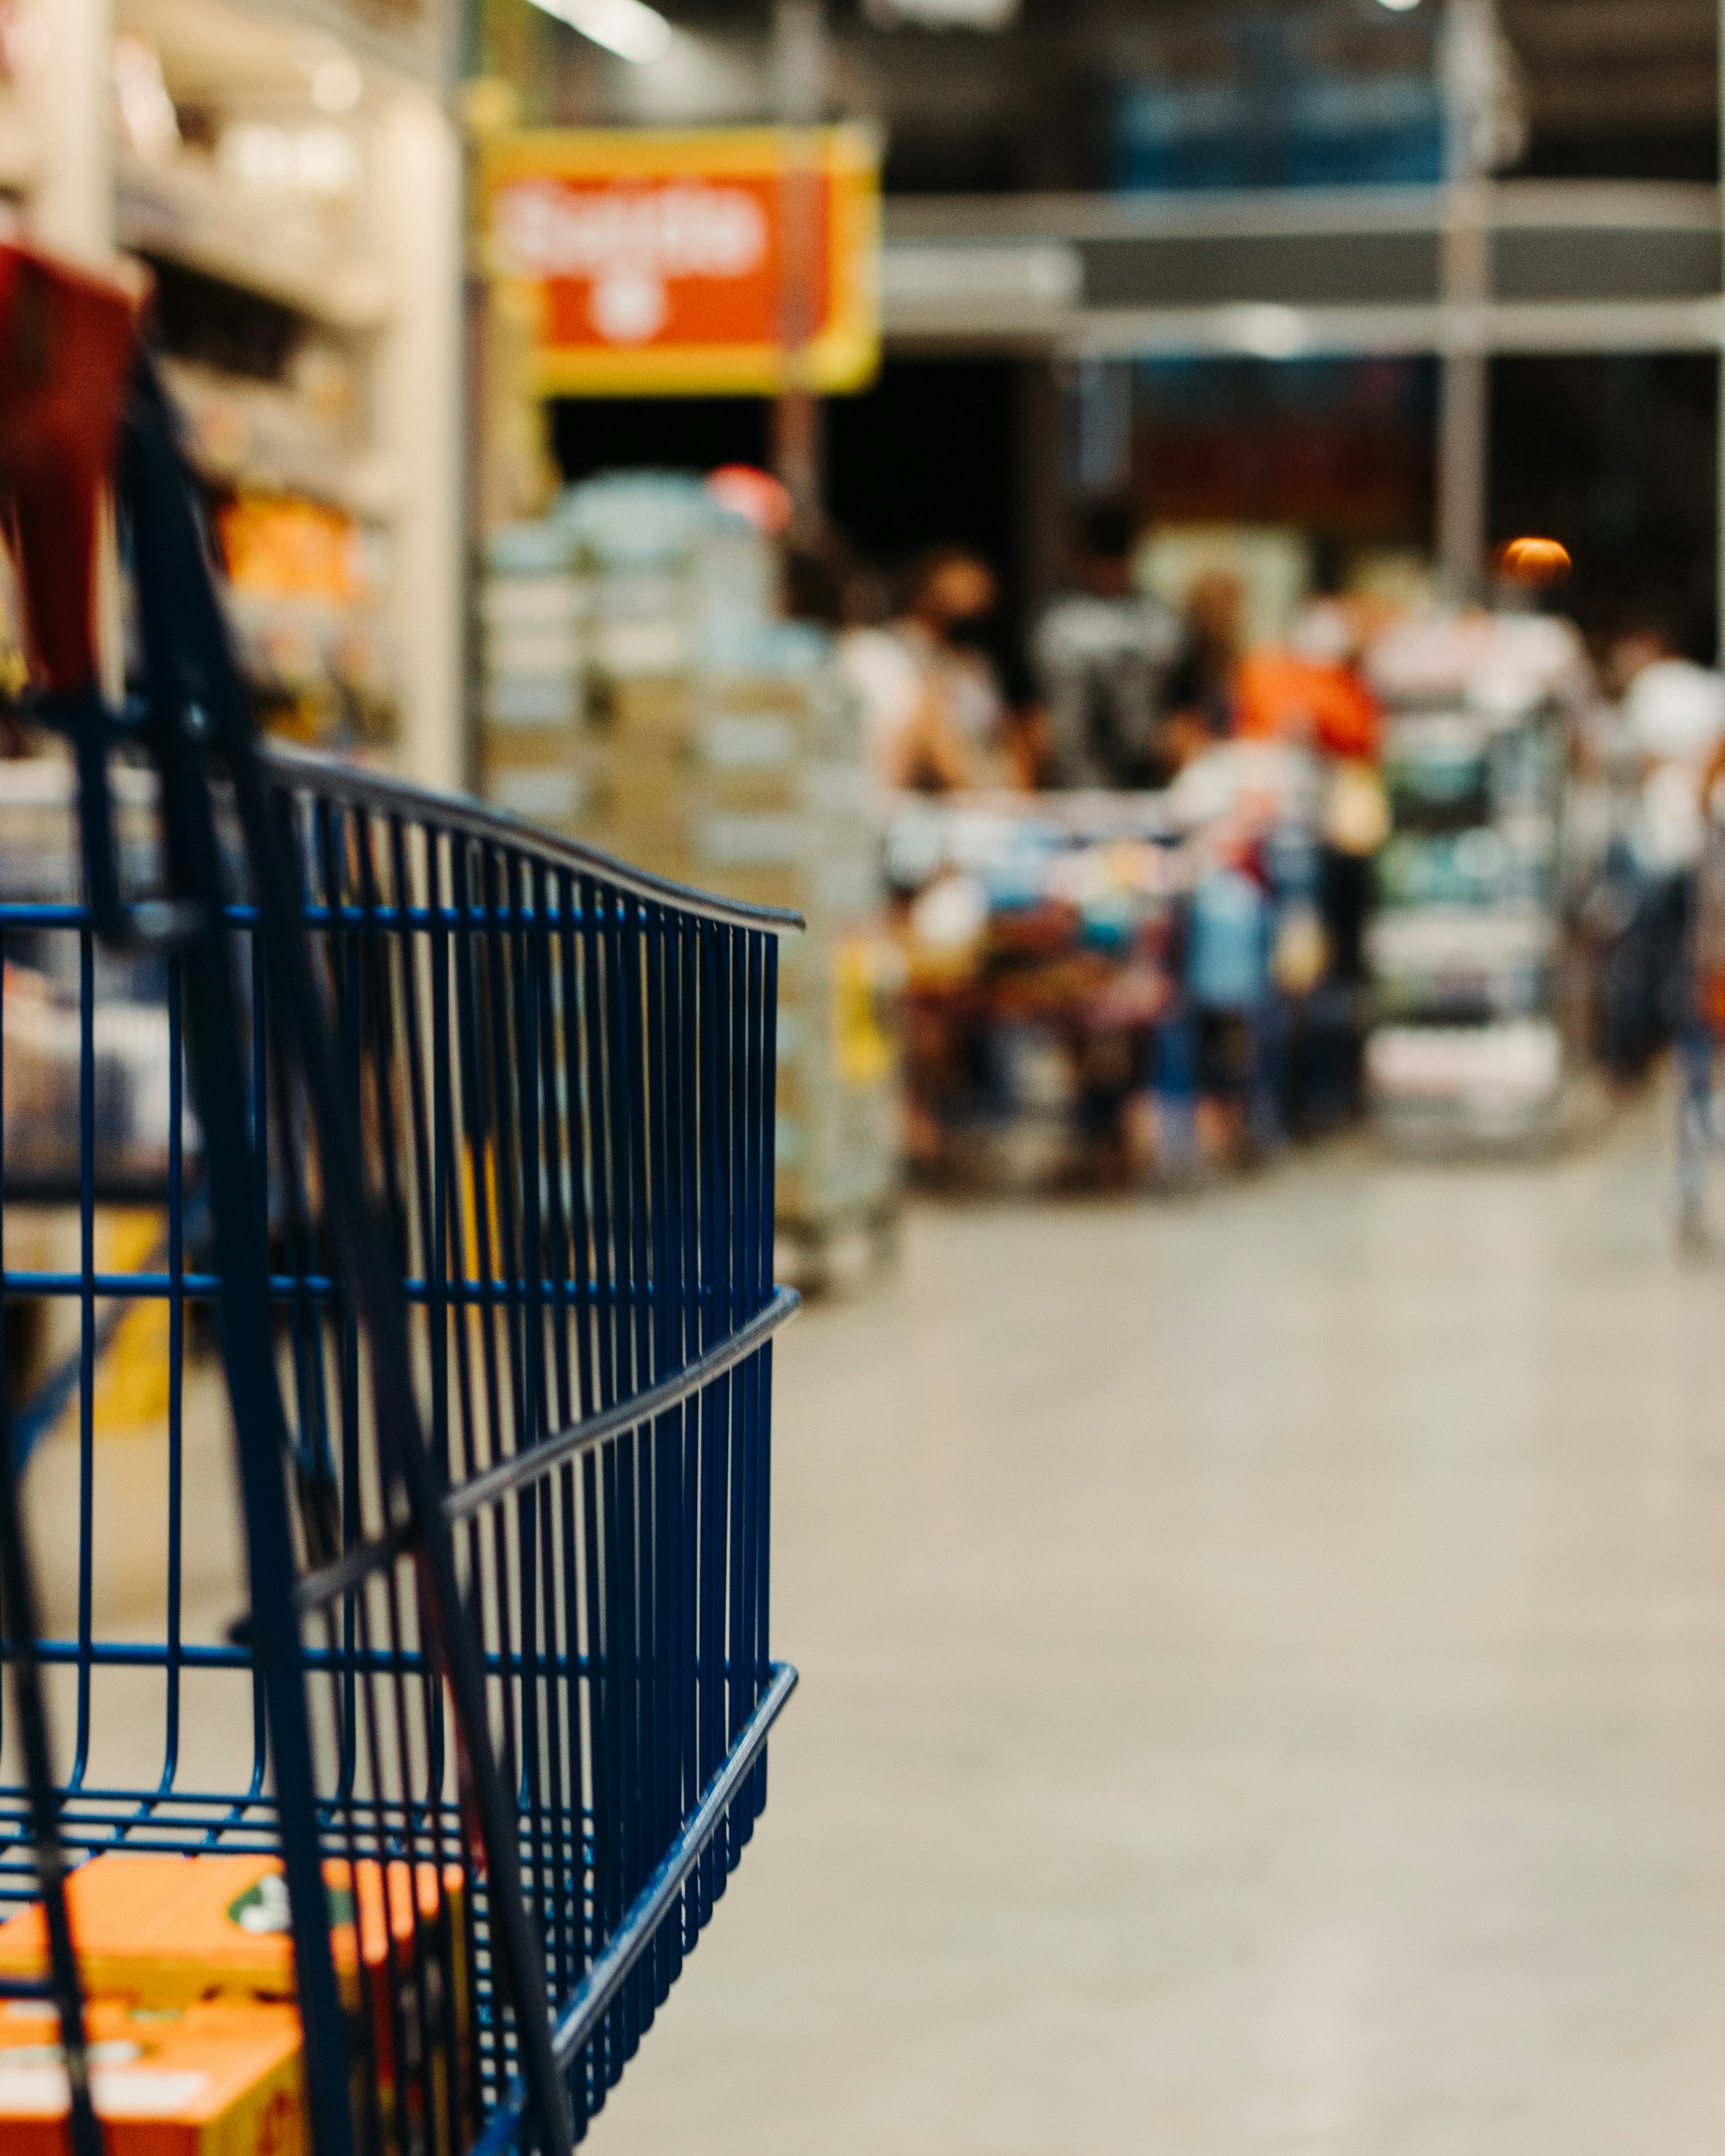 Shopping cart at a grocery store | Source: Unsplash